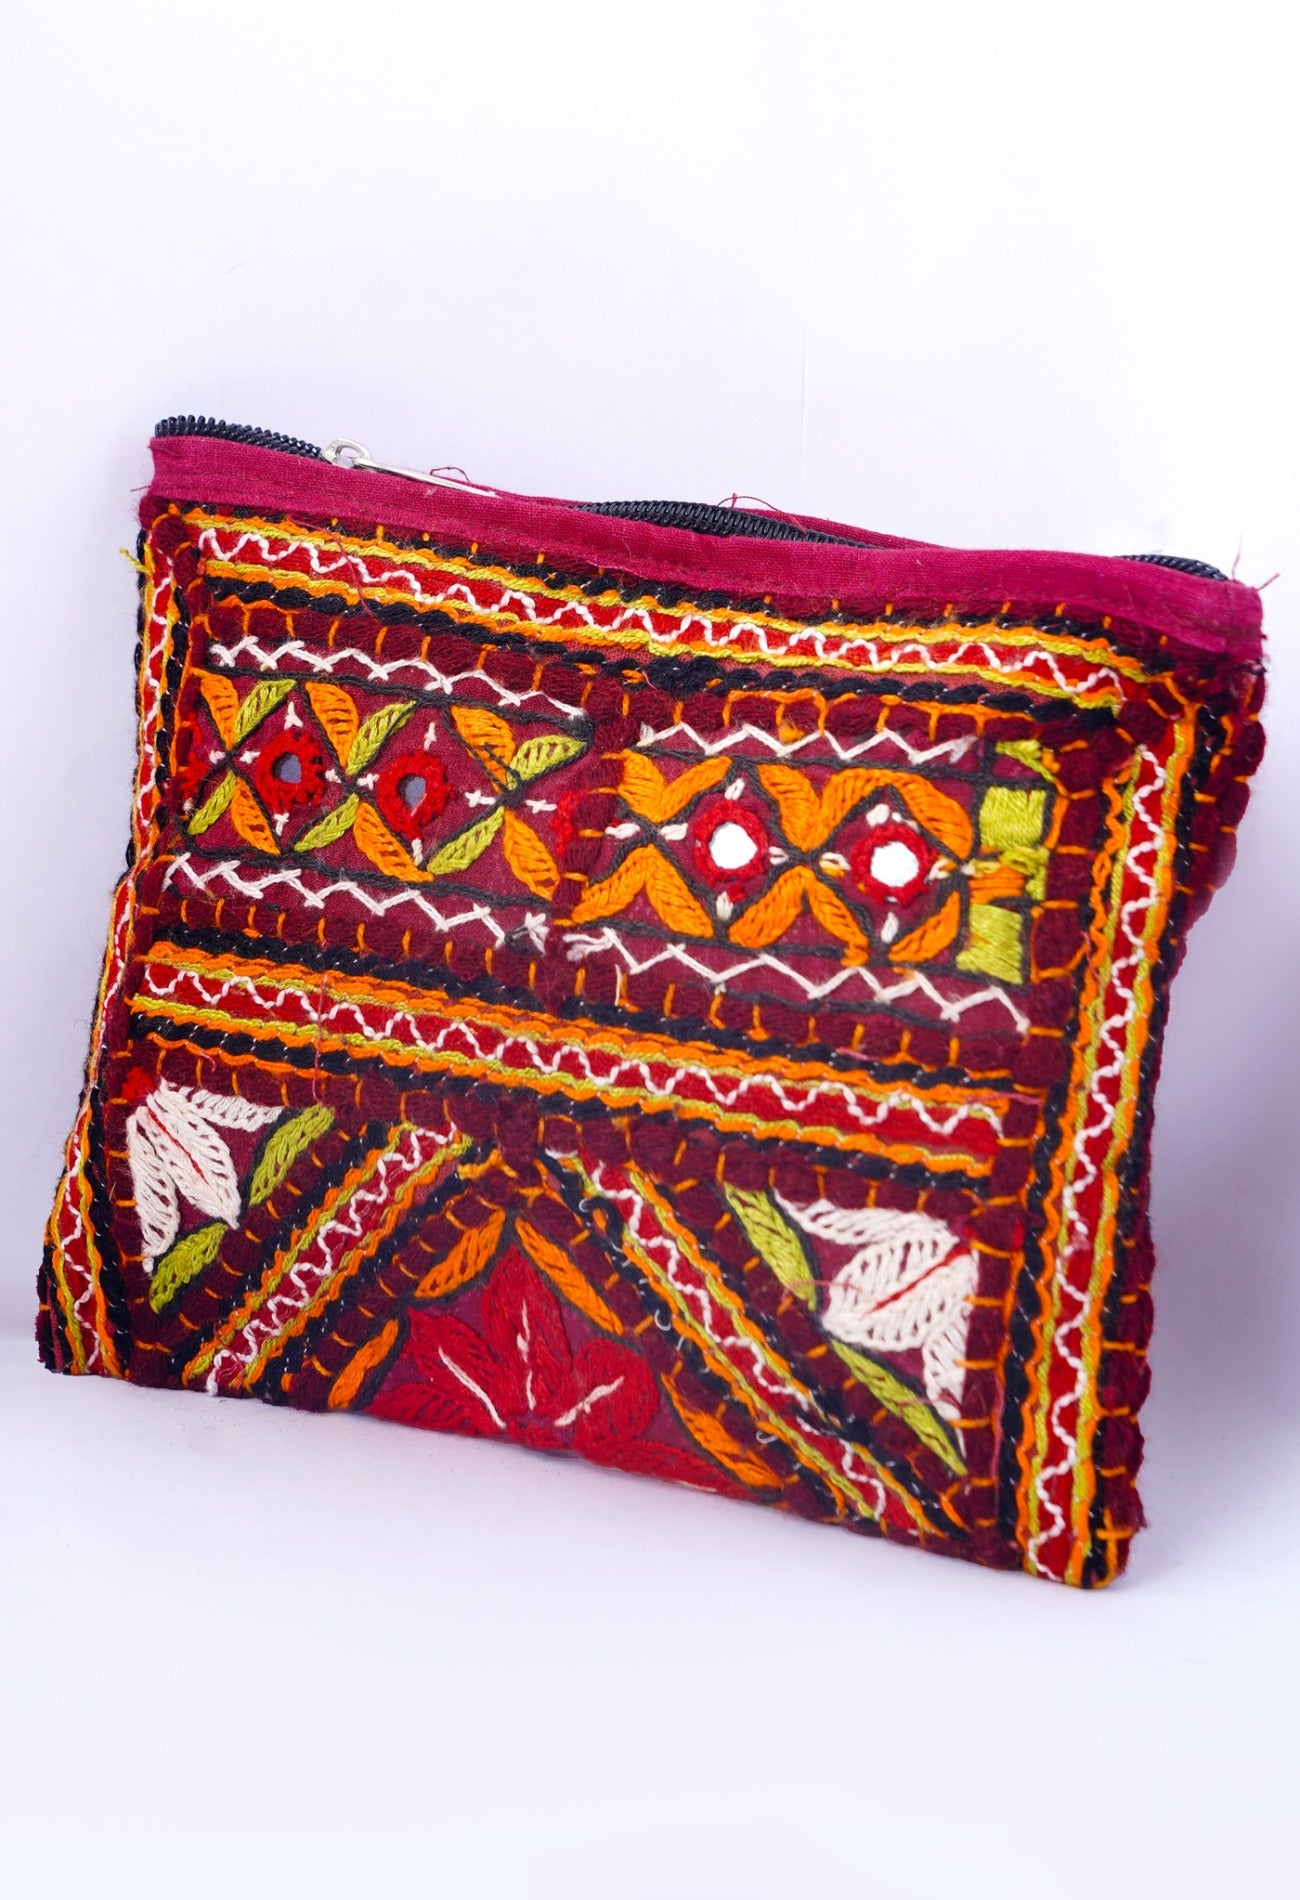 Online Shopping for Maroon Indian Handicraft Embroidered Clutch Bag with Weaving from Rajasthan at Unnatisilks.com India_x000D_
